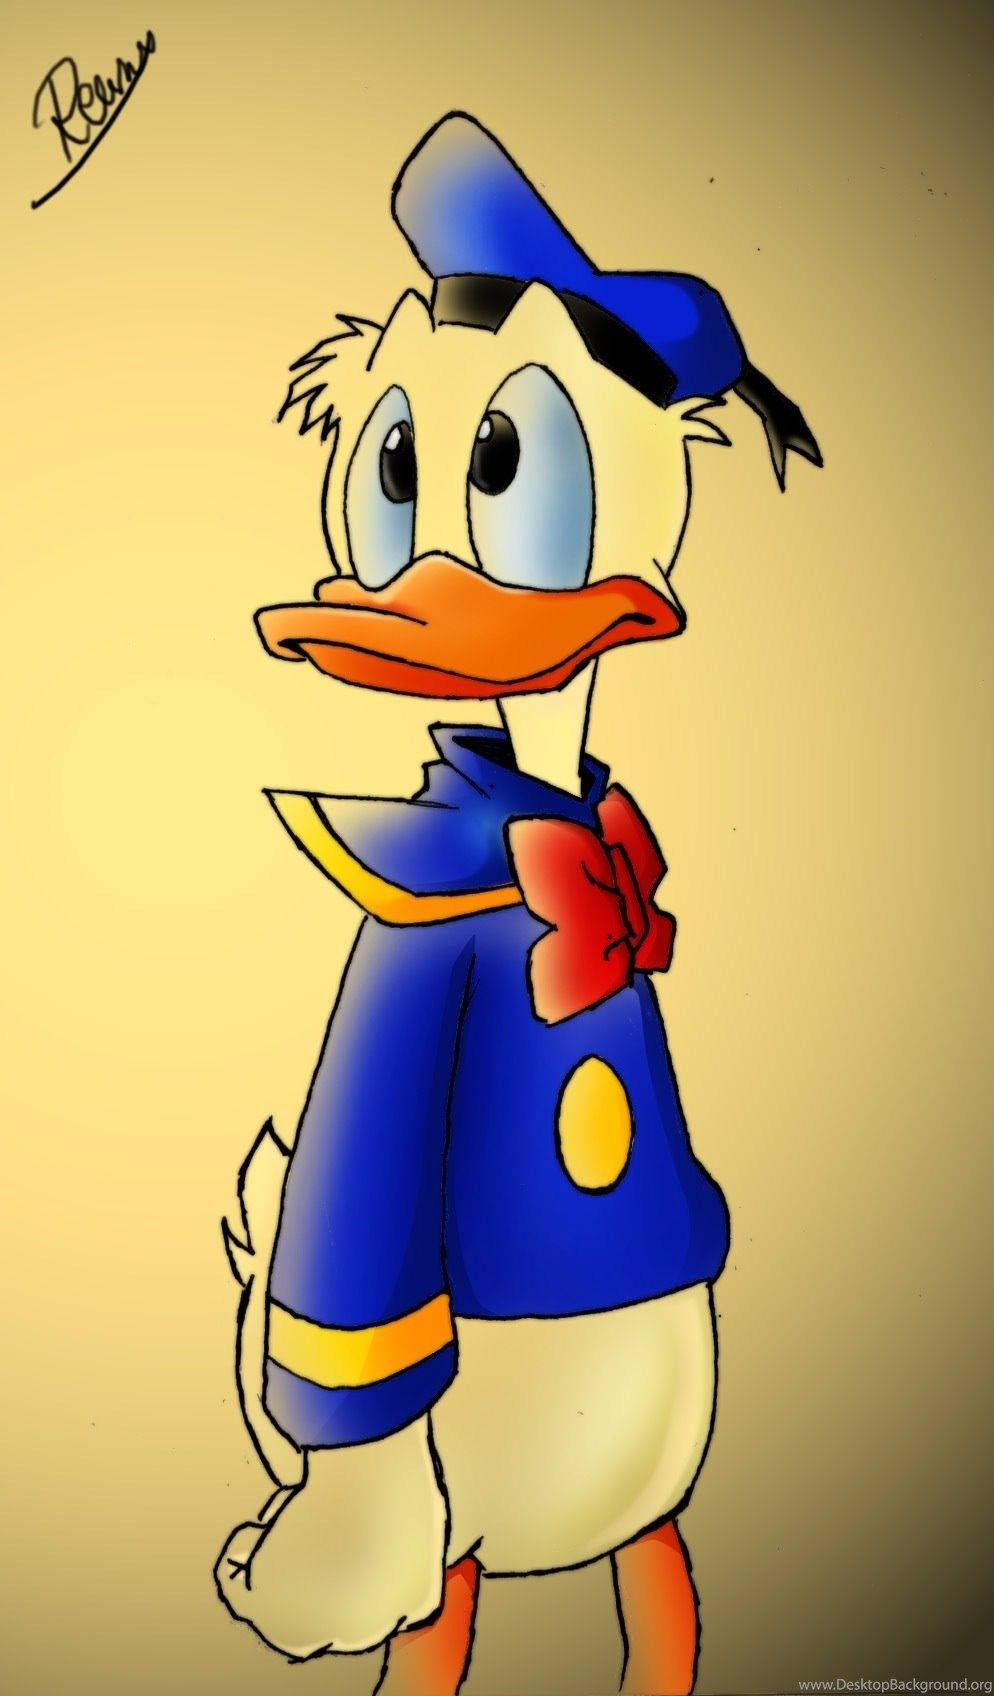 Donald Duck In Yellow Vignette Background